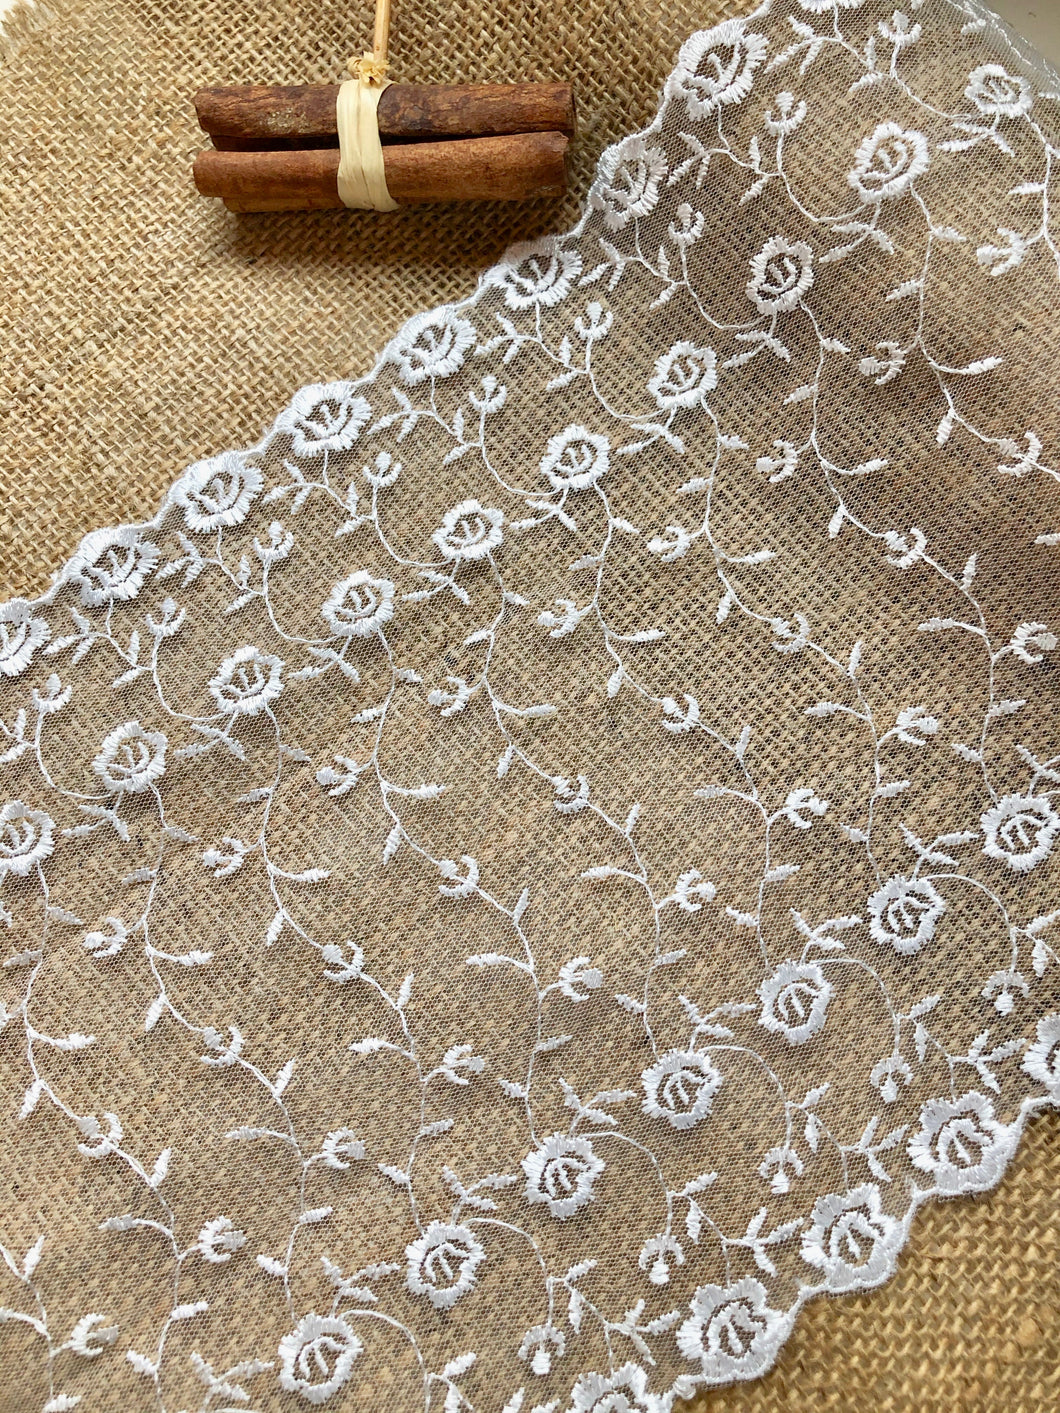 13.7 m Ivory Embroidered Wide Tulle Double Scalloped Lace 22 cm/8.5